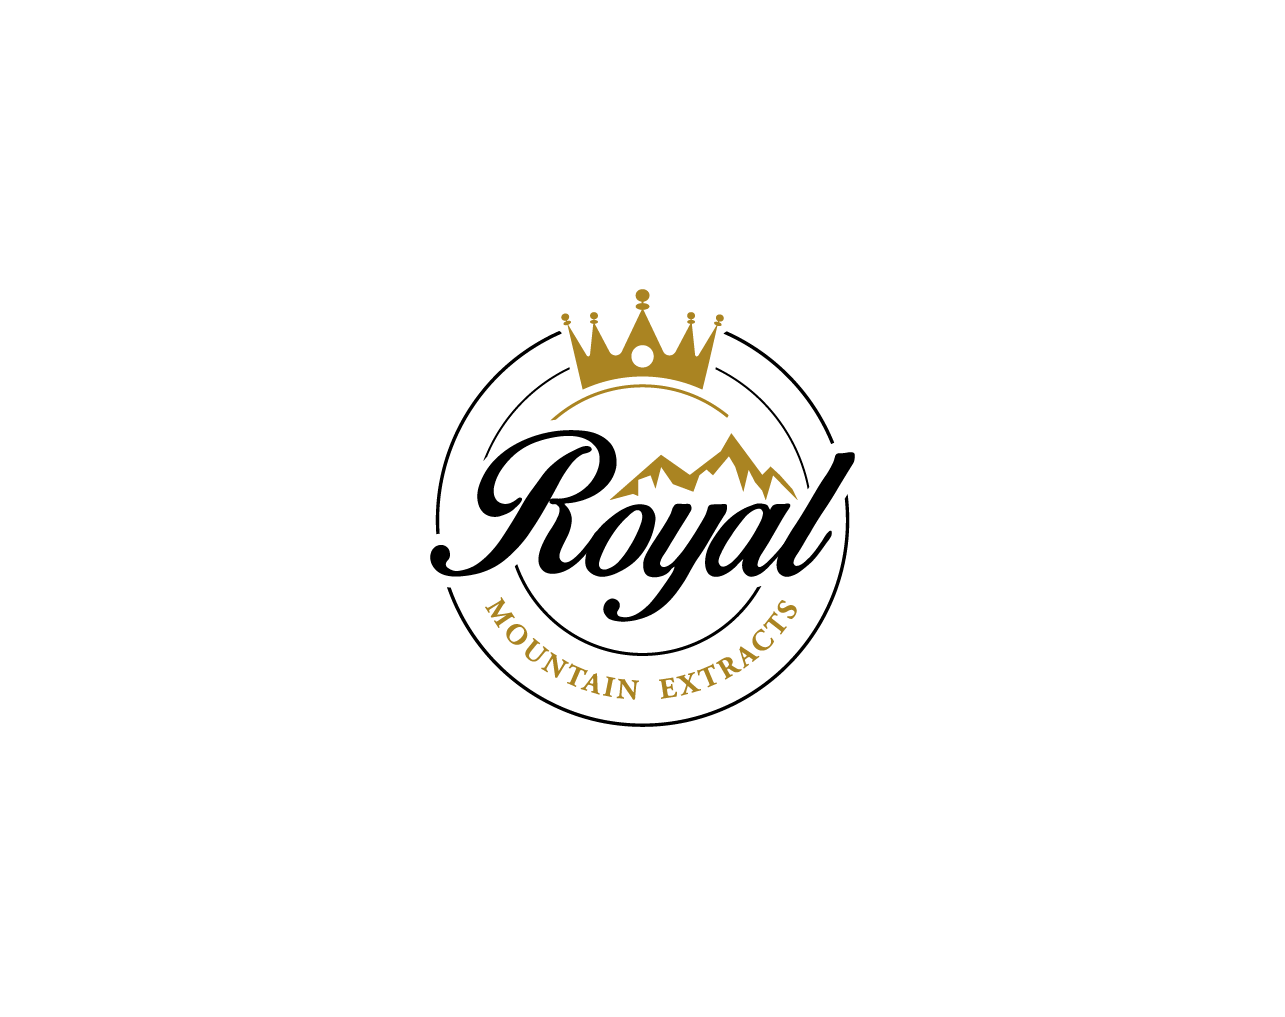 1040 Logo - Logo Design. 'Royal Mountain Extracts' design project